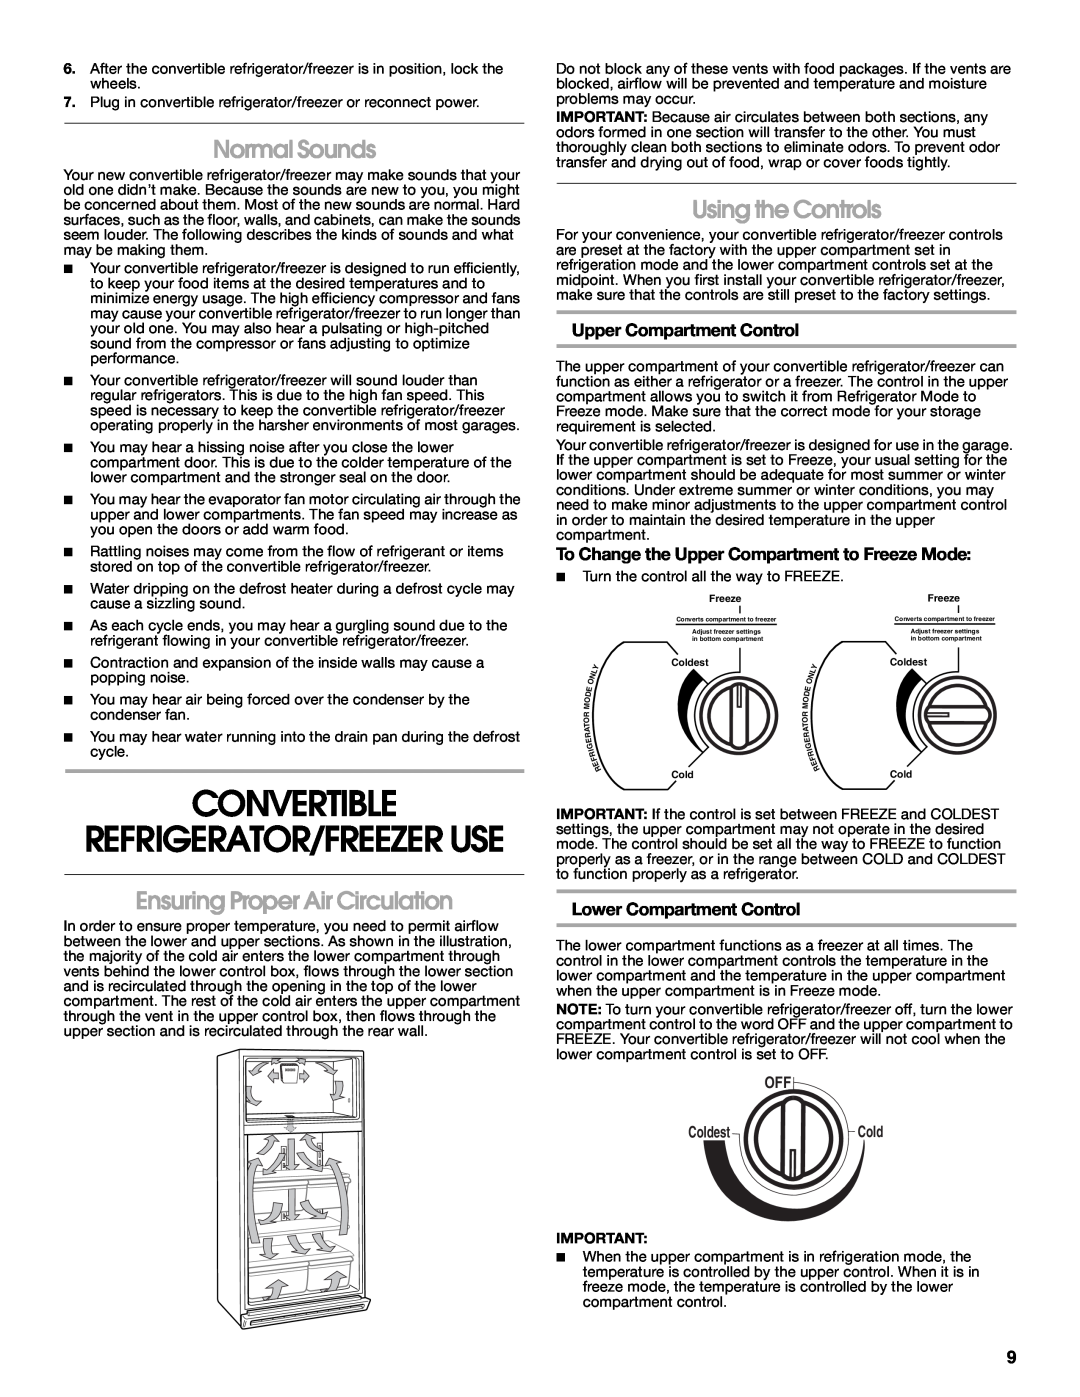 Whirlpool 2314466 Convertible, Refrigerator/Freezer Use, Normal Sounds, Ensuring Proper Air Circulation, OFF ColdestCold 